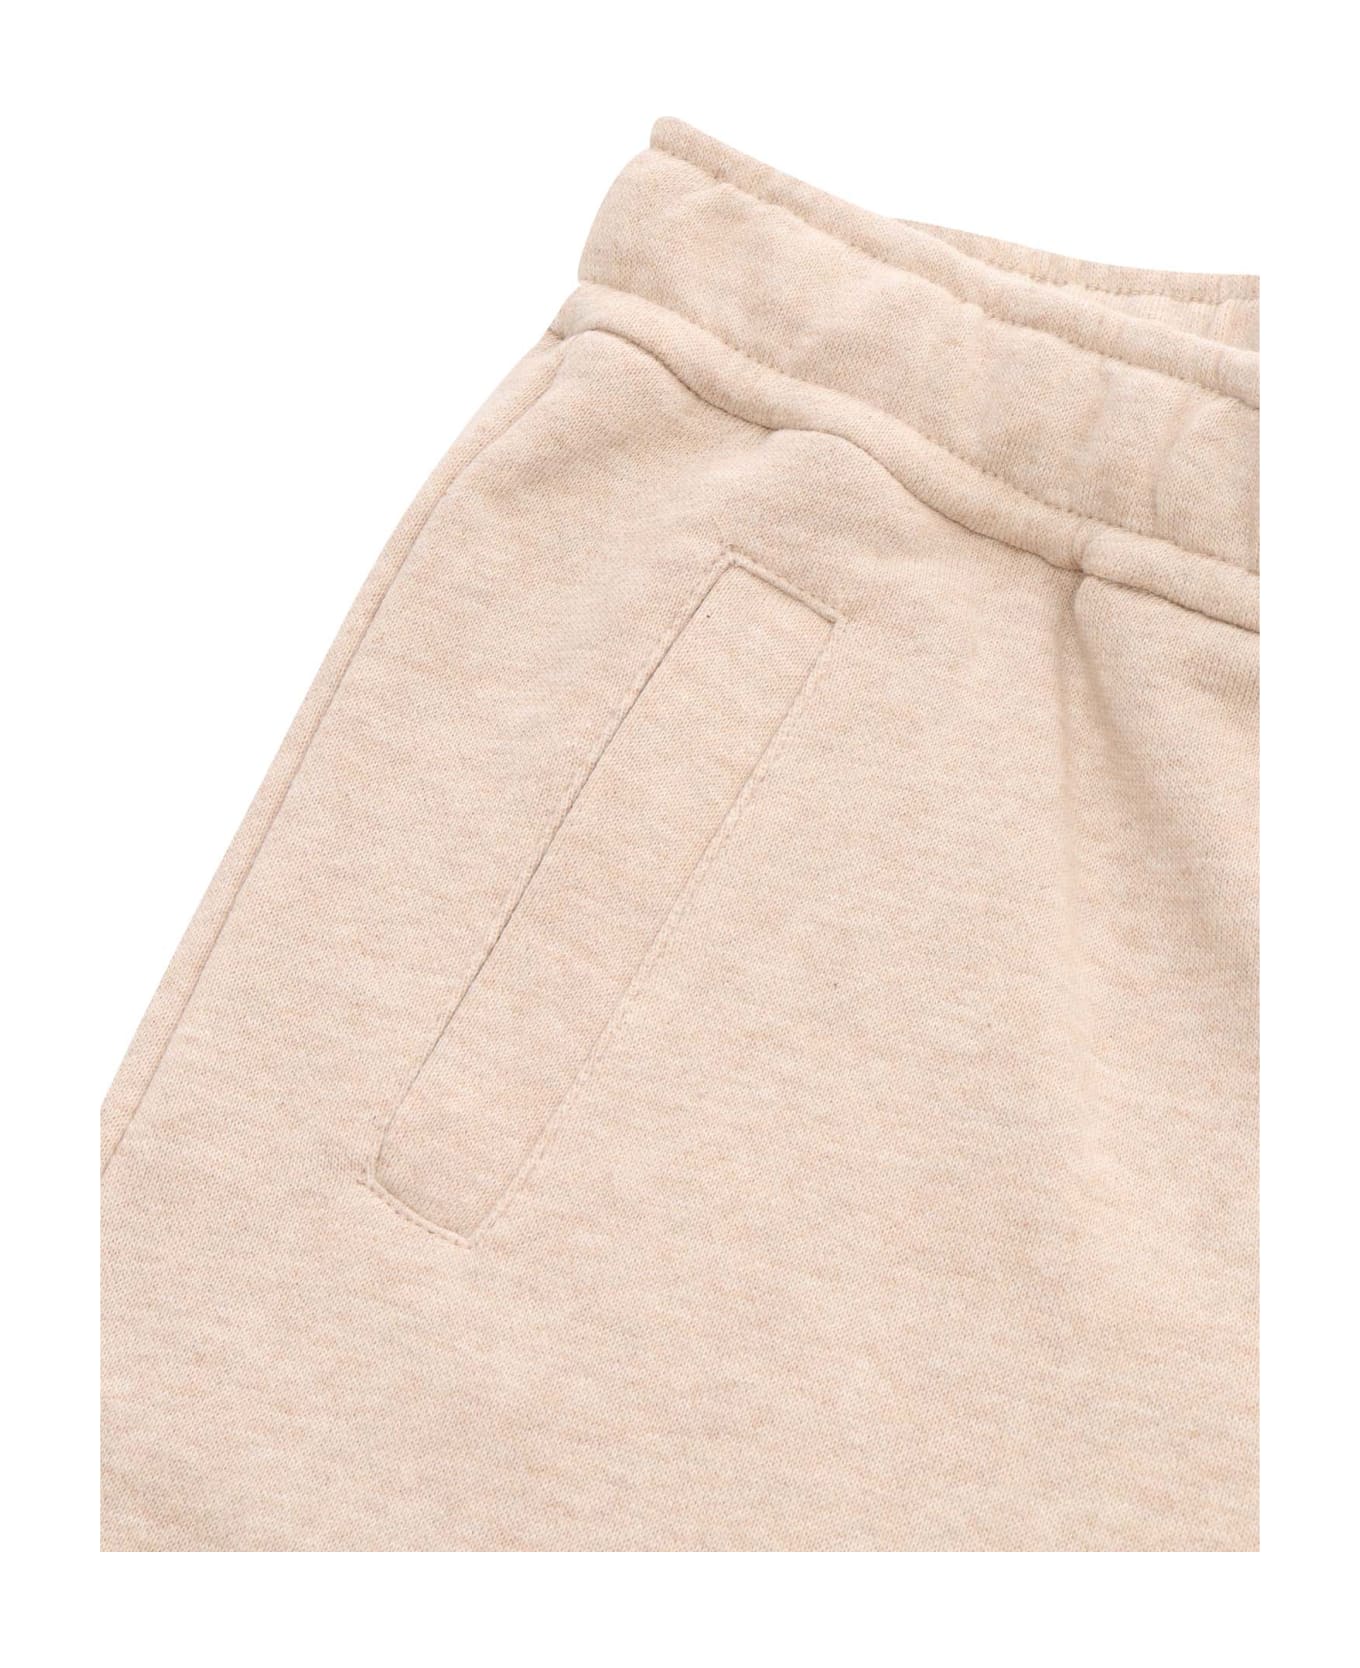 Chloé Jogging Trousers - BEIGE ボトムス